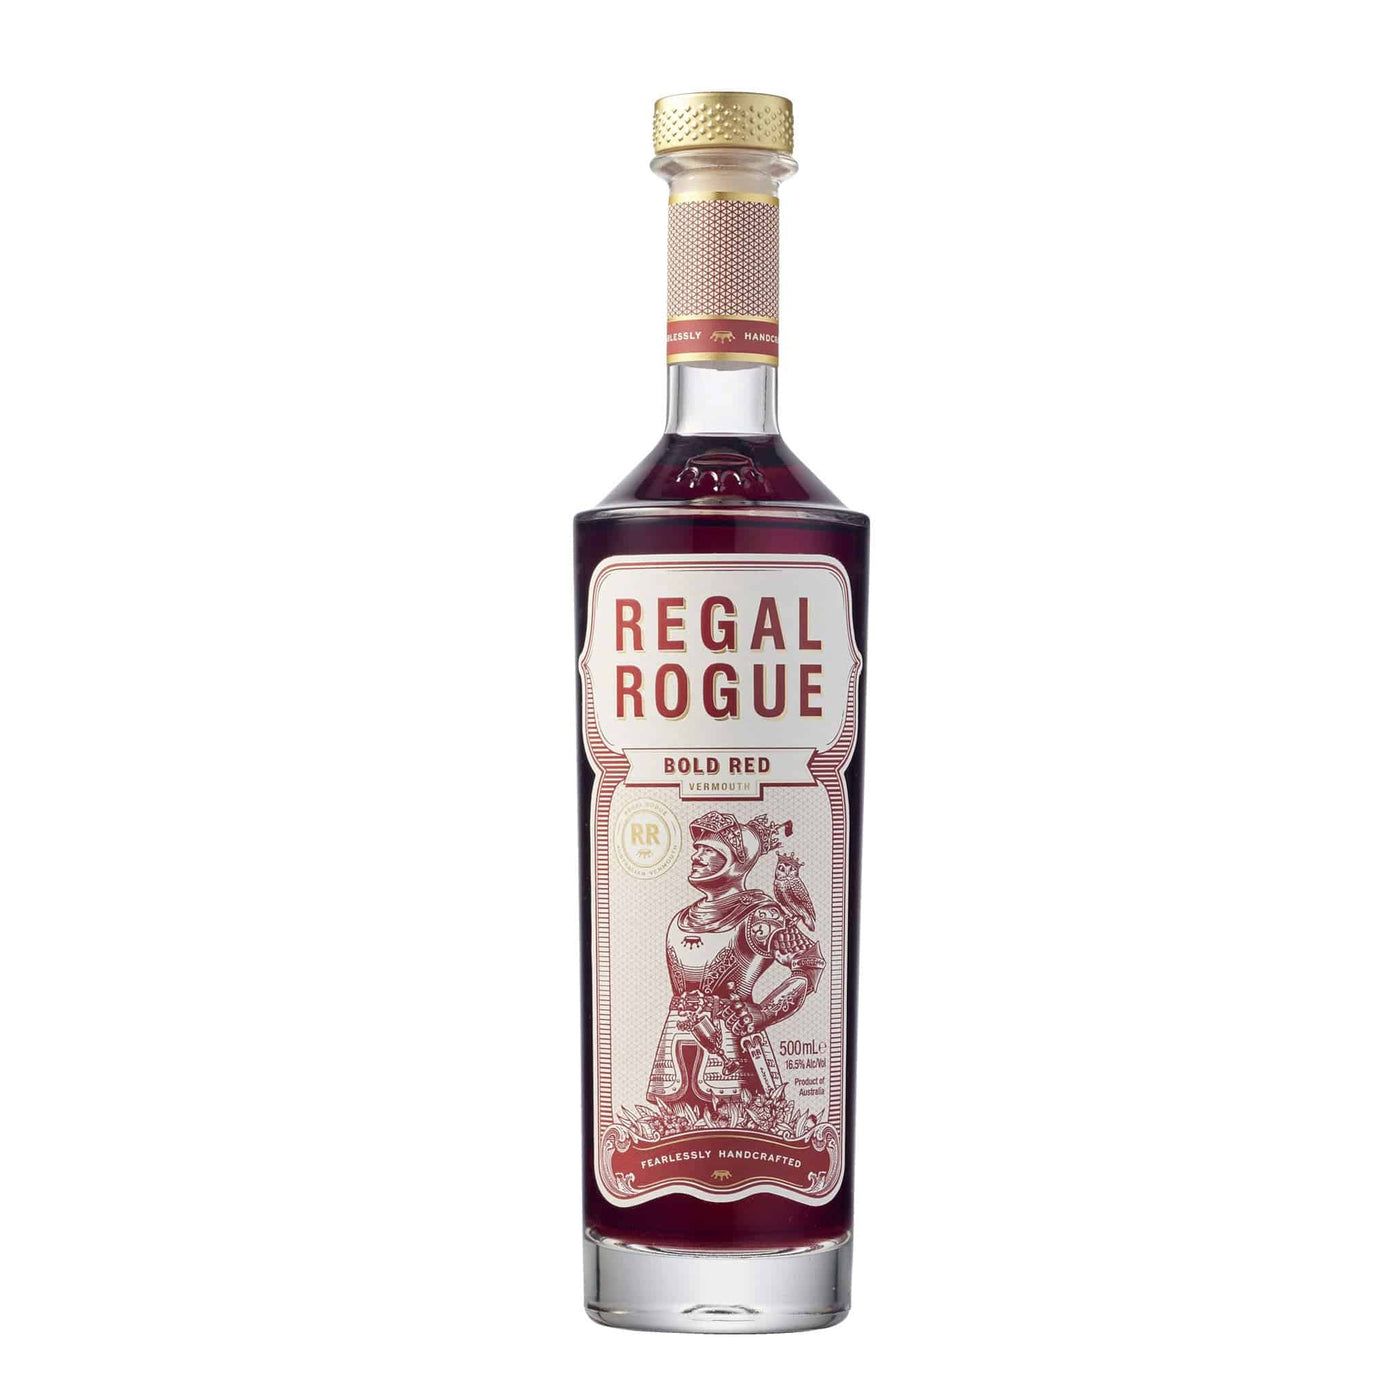 Regal Rogue Bold Red Vermouth